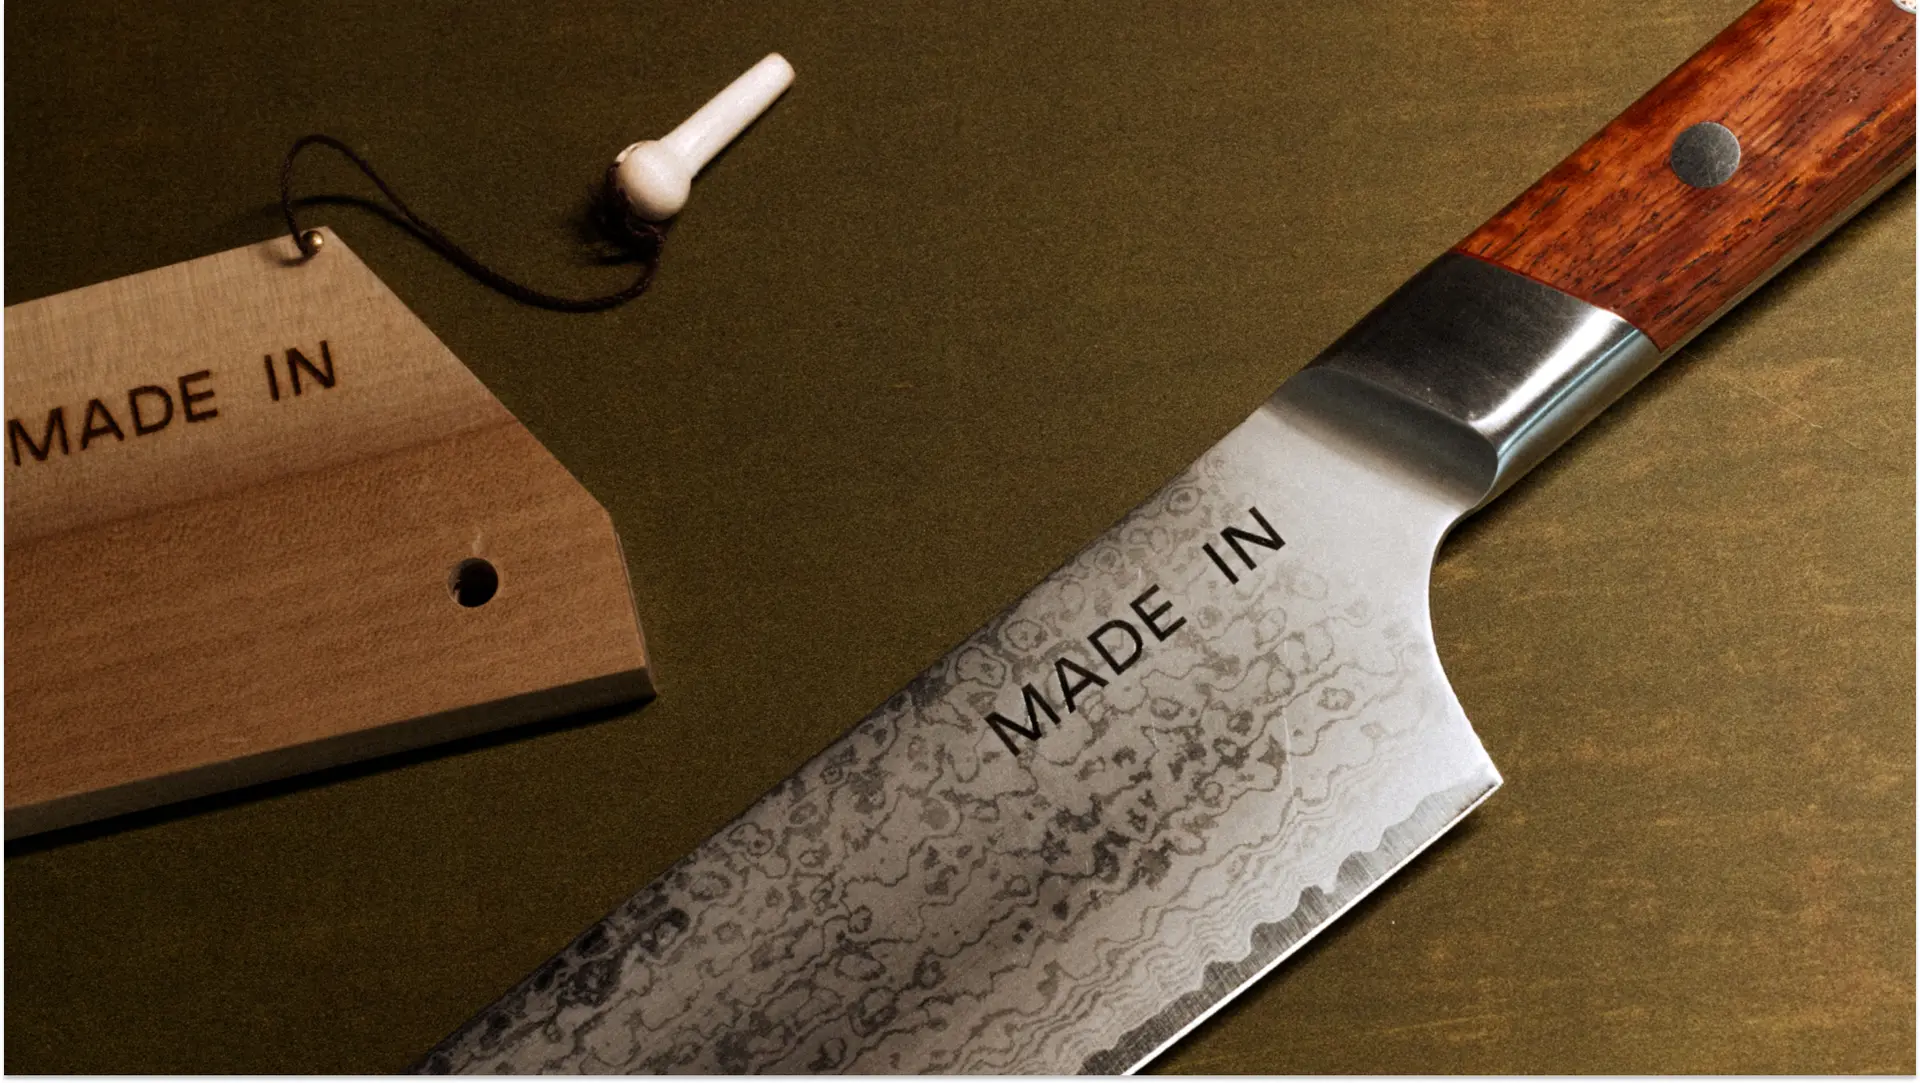 A close-up of a kitchen knife with a wooden handle and a patterned steel blade, next to a hanging tag marking it as "MADE IN."